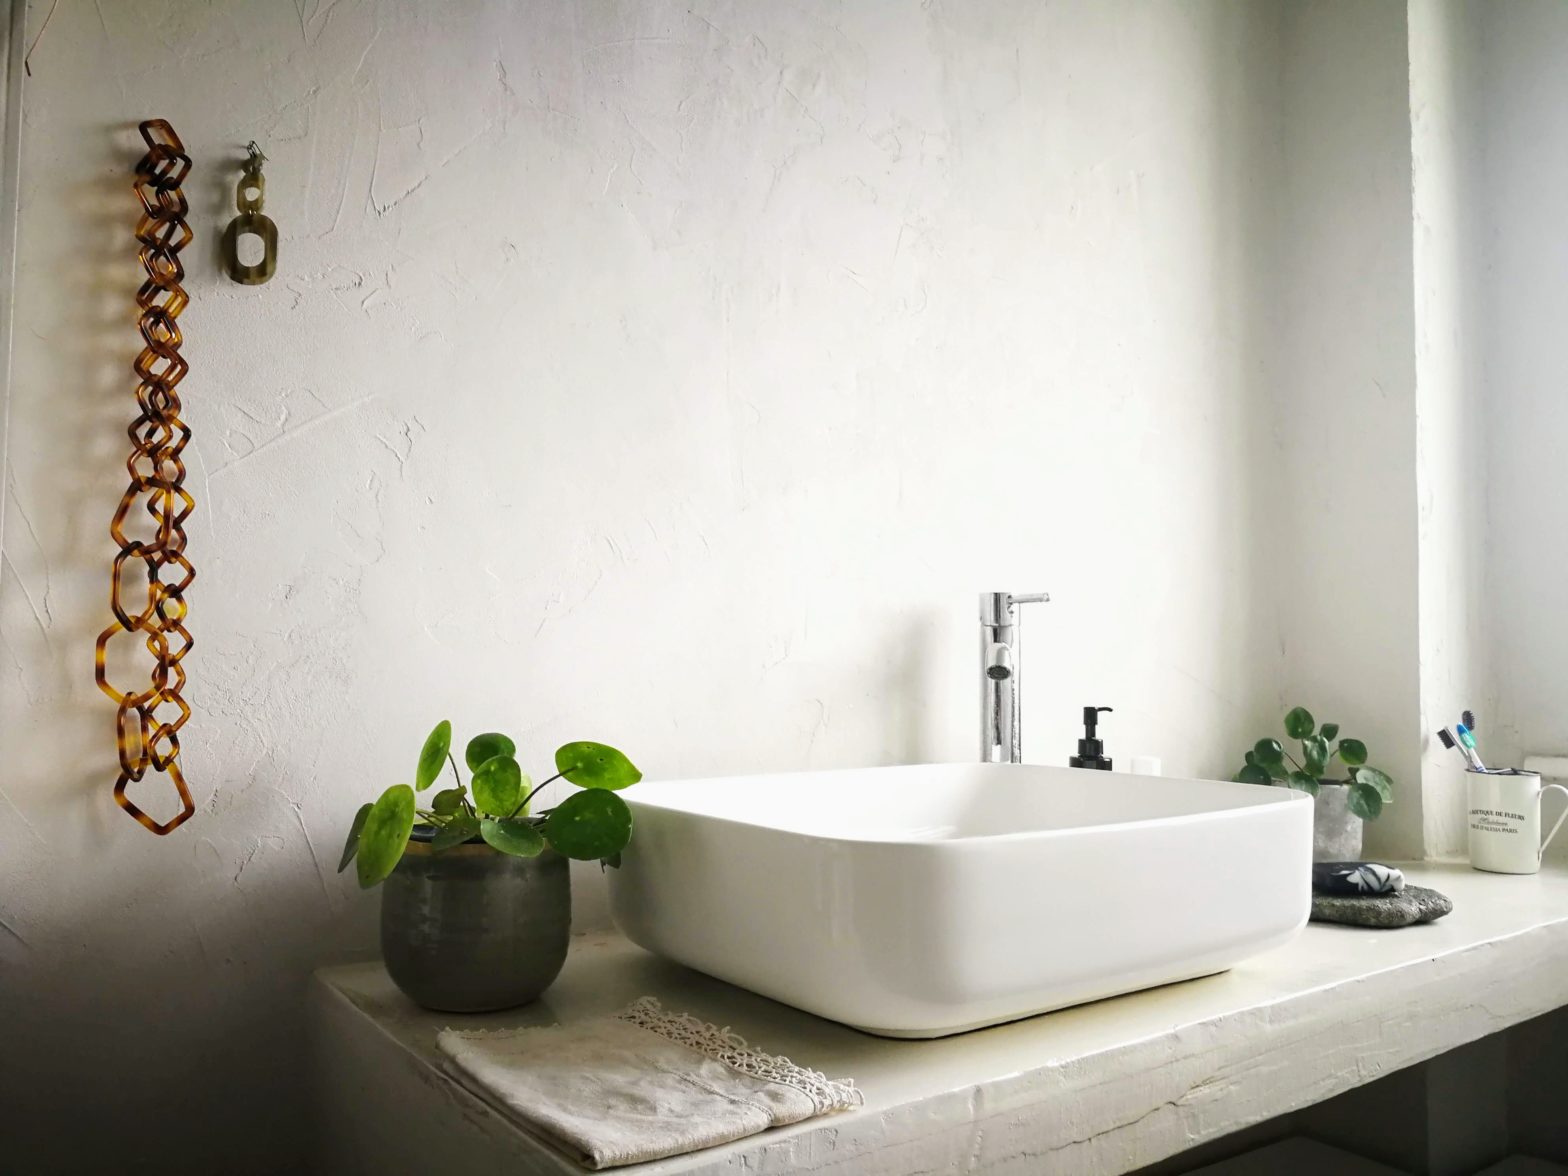 boho-chic, contemporary bathroom. Large raised basin on an L-shaped countertop. White micro-cement walls and plenty of greenery completed with a resin neckless display